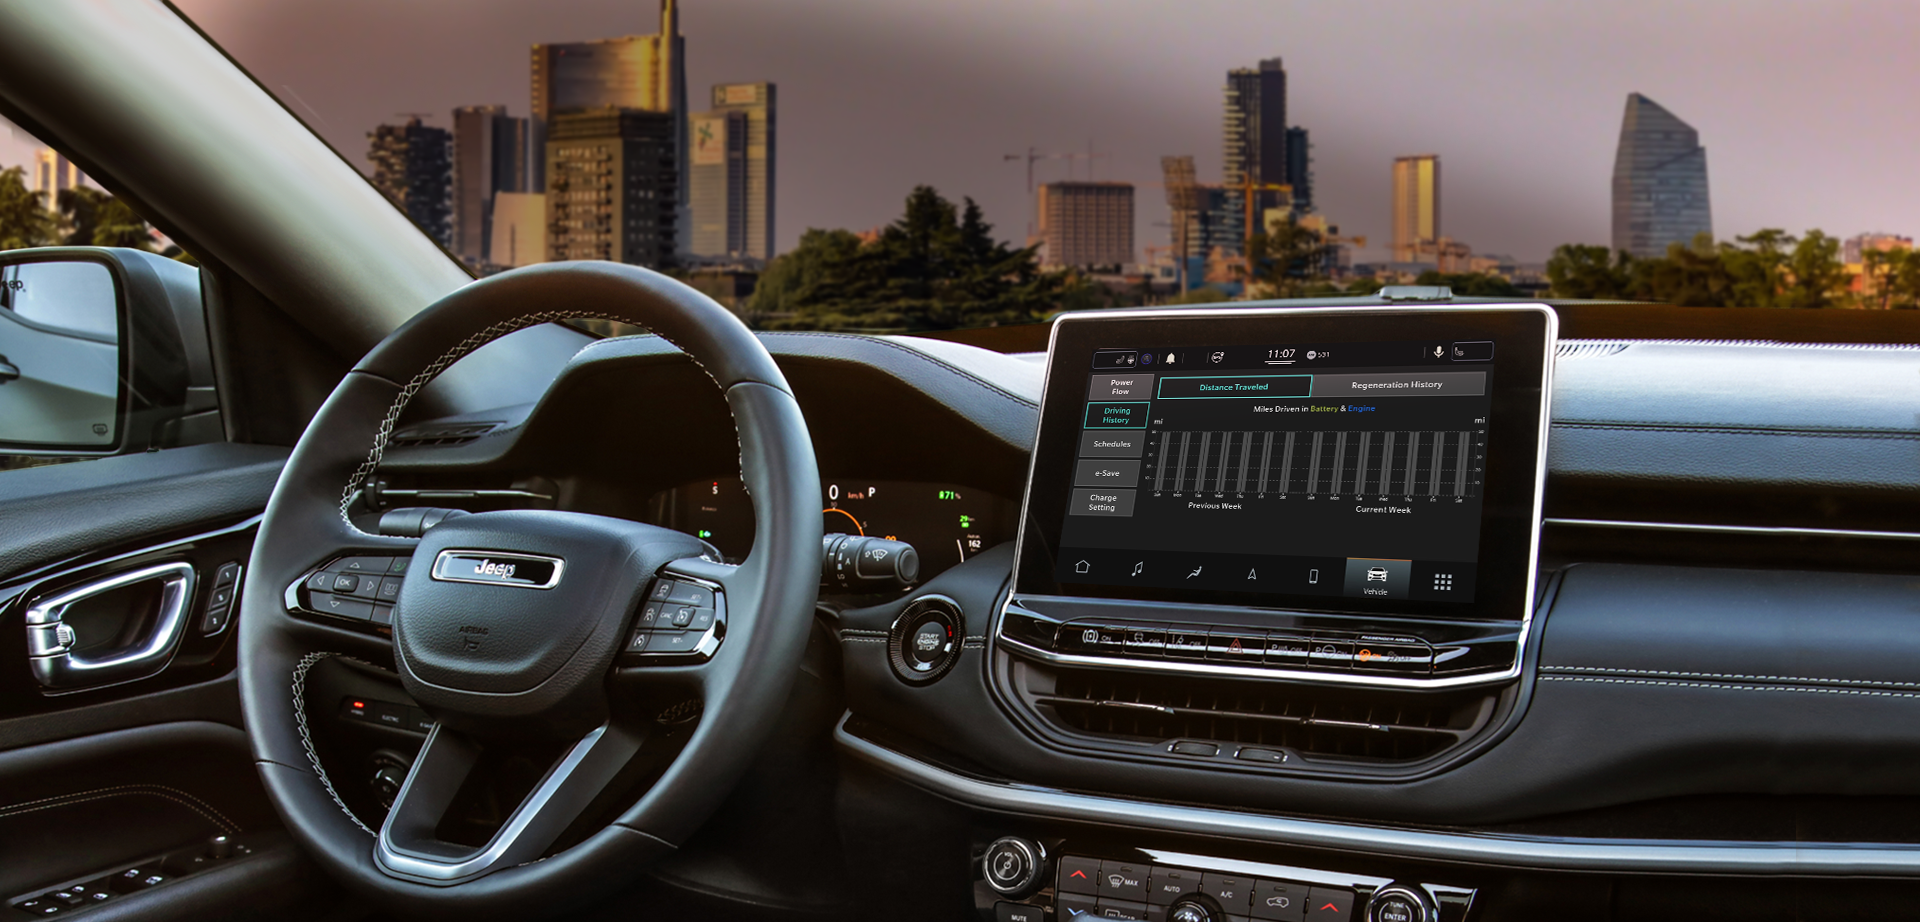 New Uconnect™ infotainment system and digital instrument cluster